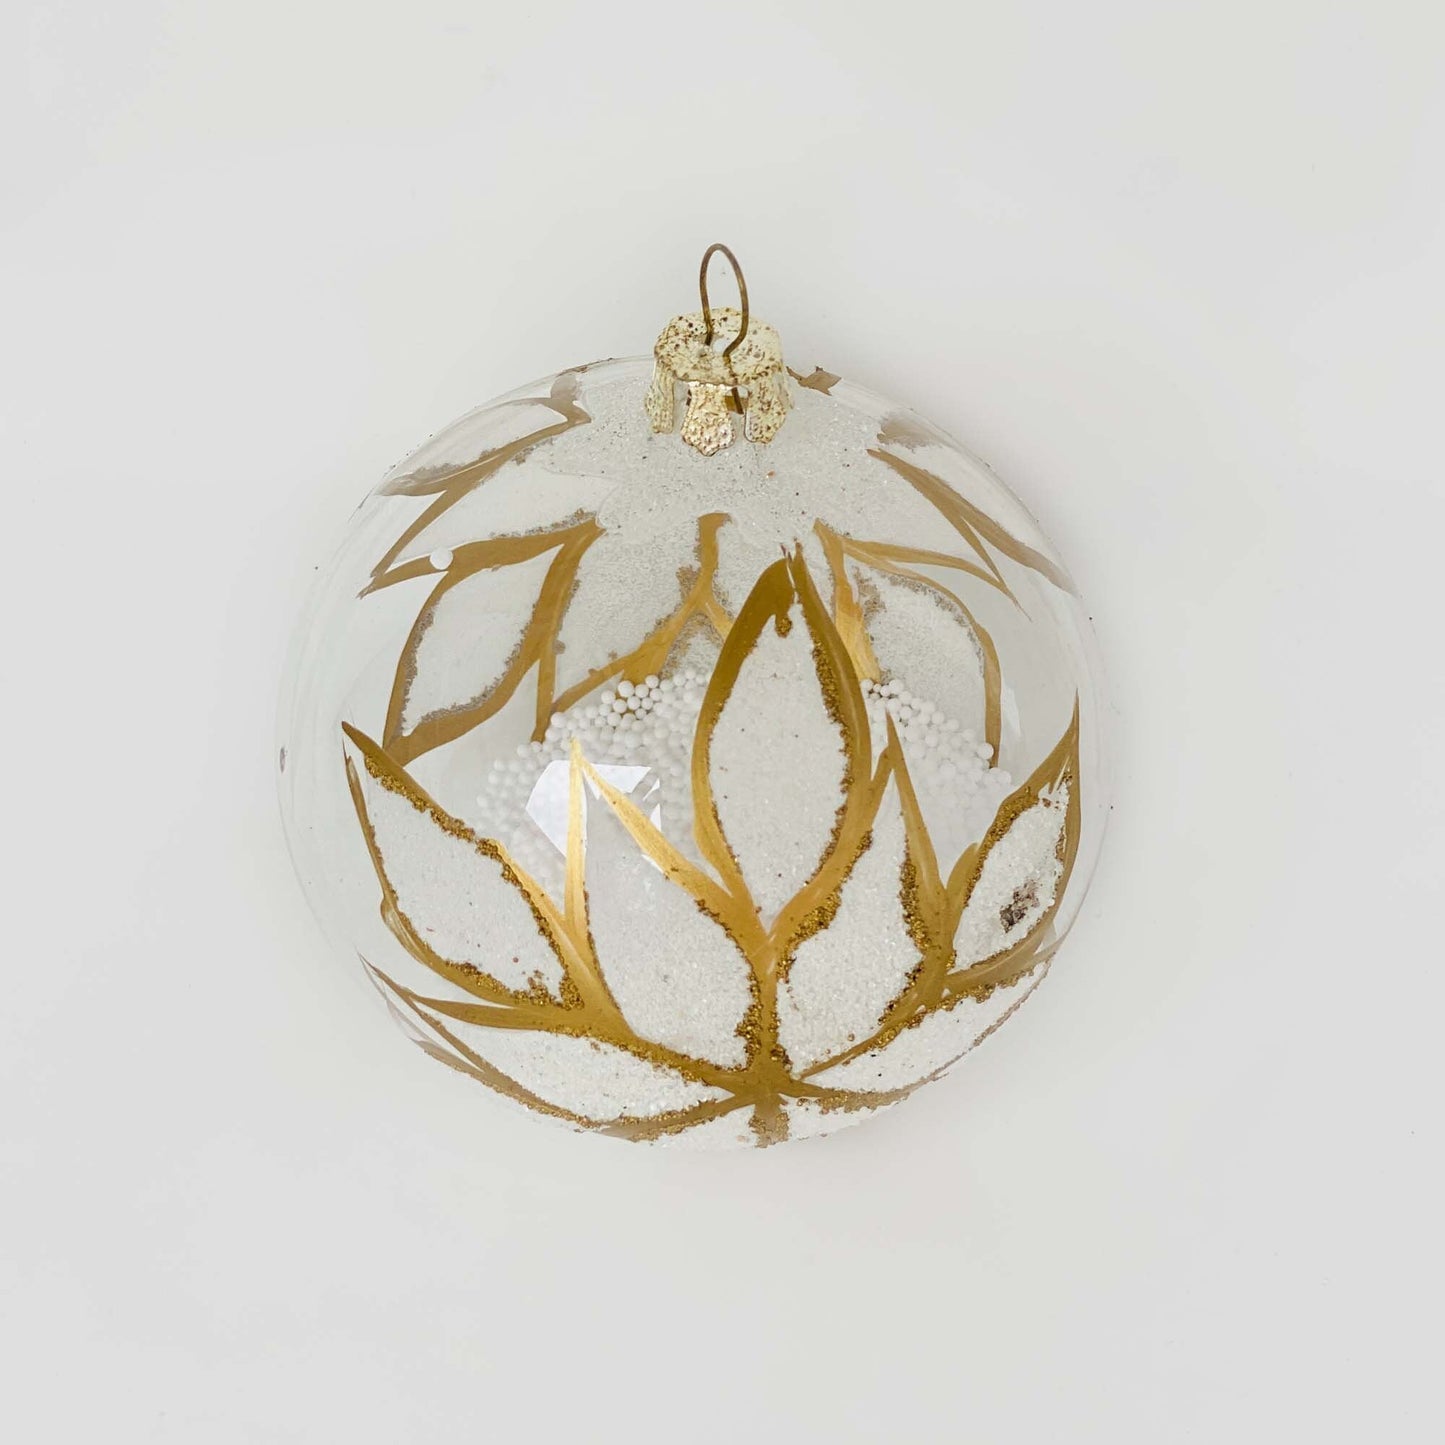 Blown Glass Christmas Gold Sphere - White and Gold Baubles (Set of 12)